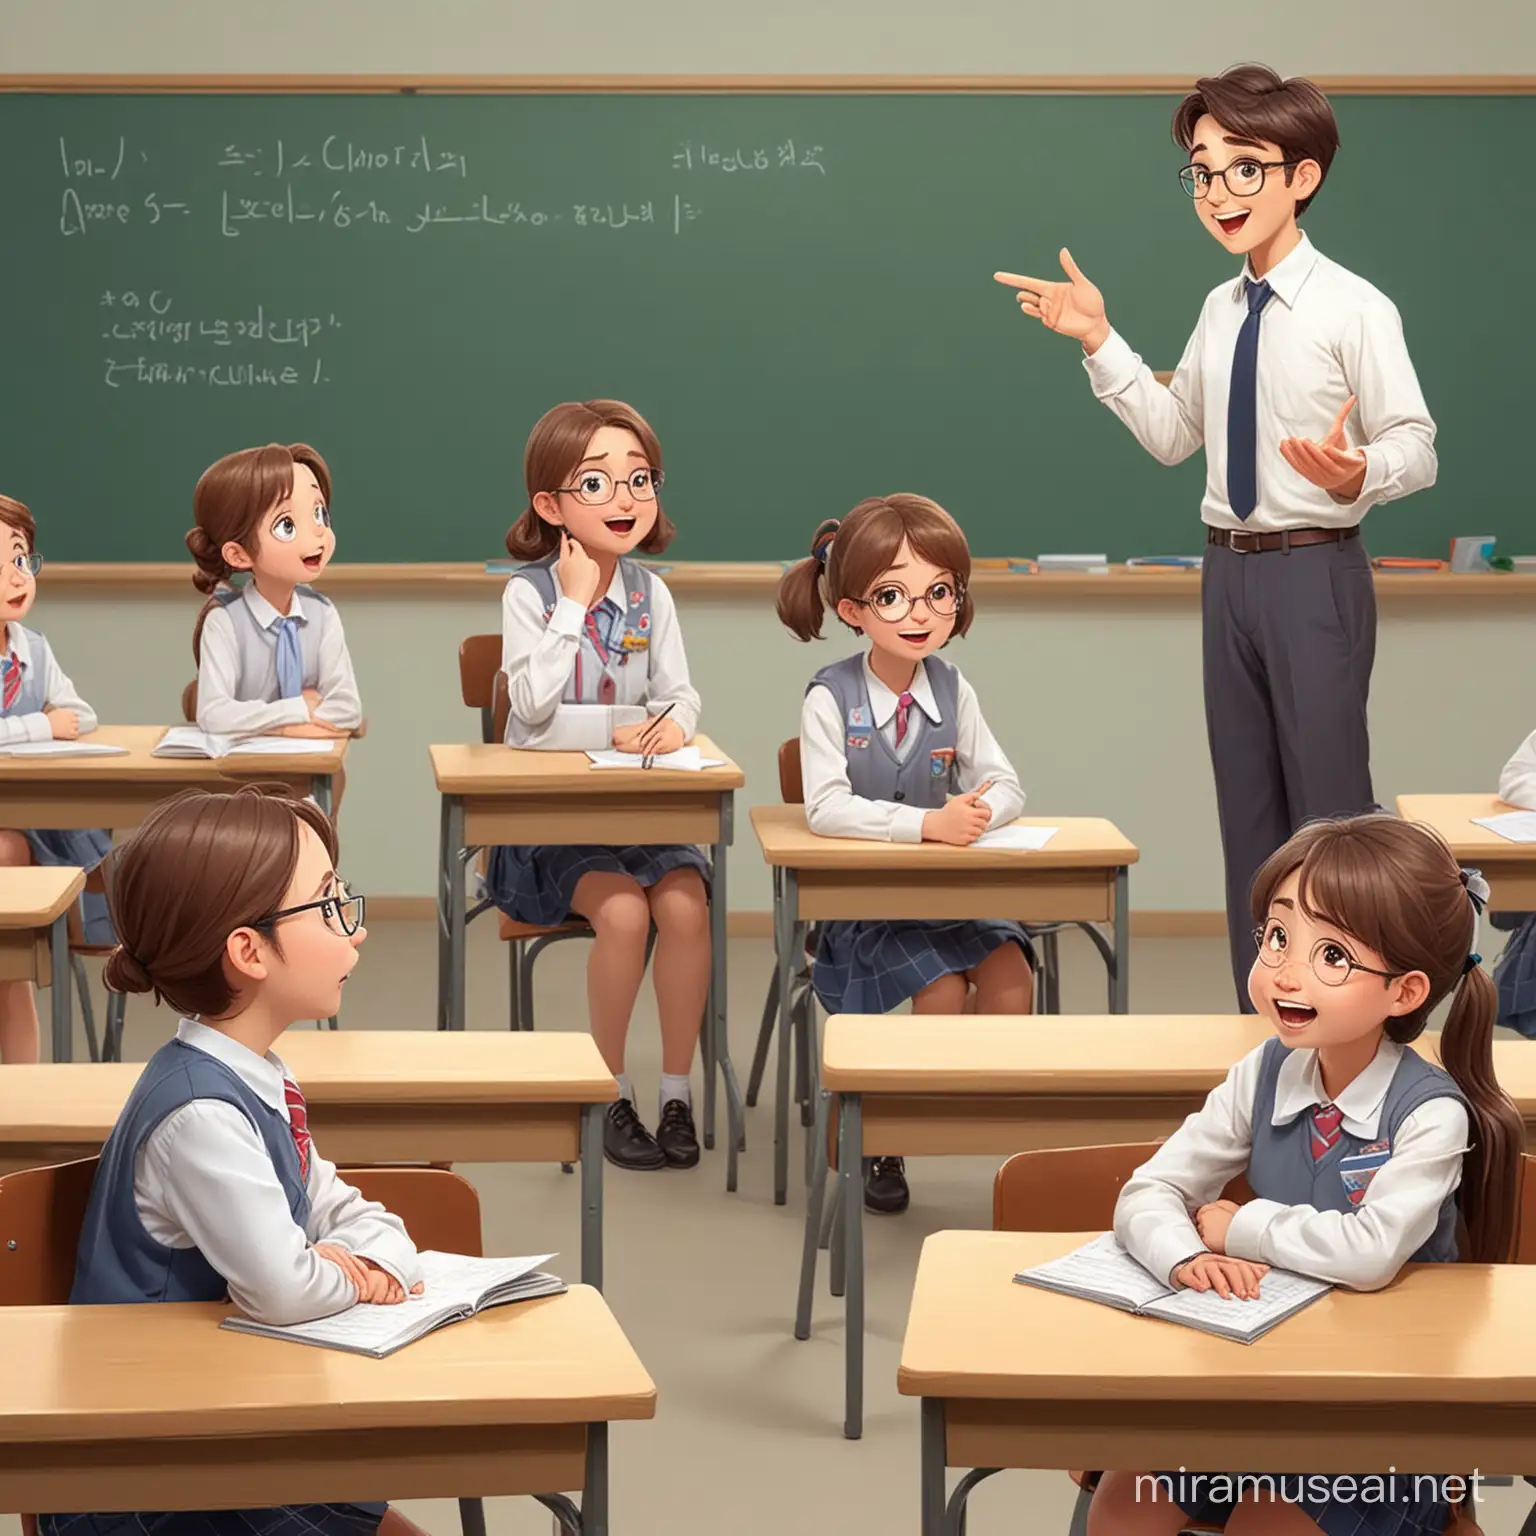 illustration art of a classroom, figure of a teacher who encourages discussion and knowledge exchanges between the teacher and students, cute poses and expressions, full color, side view, back view, front view, no outline